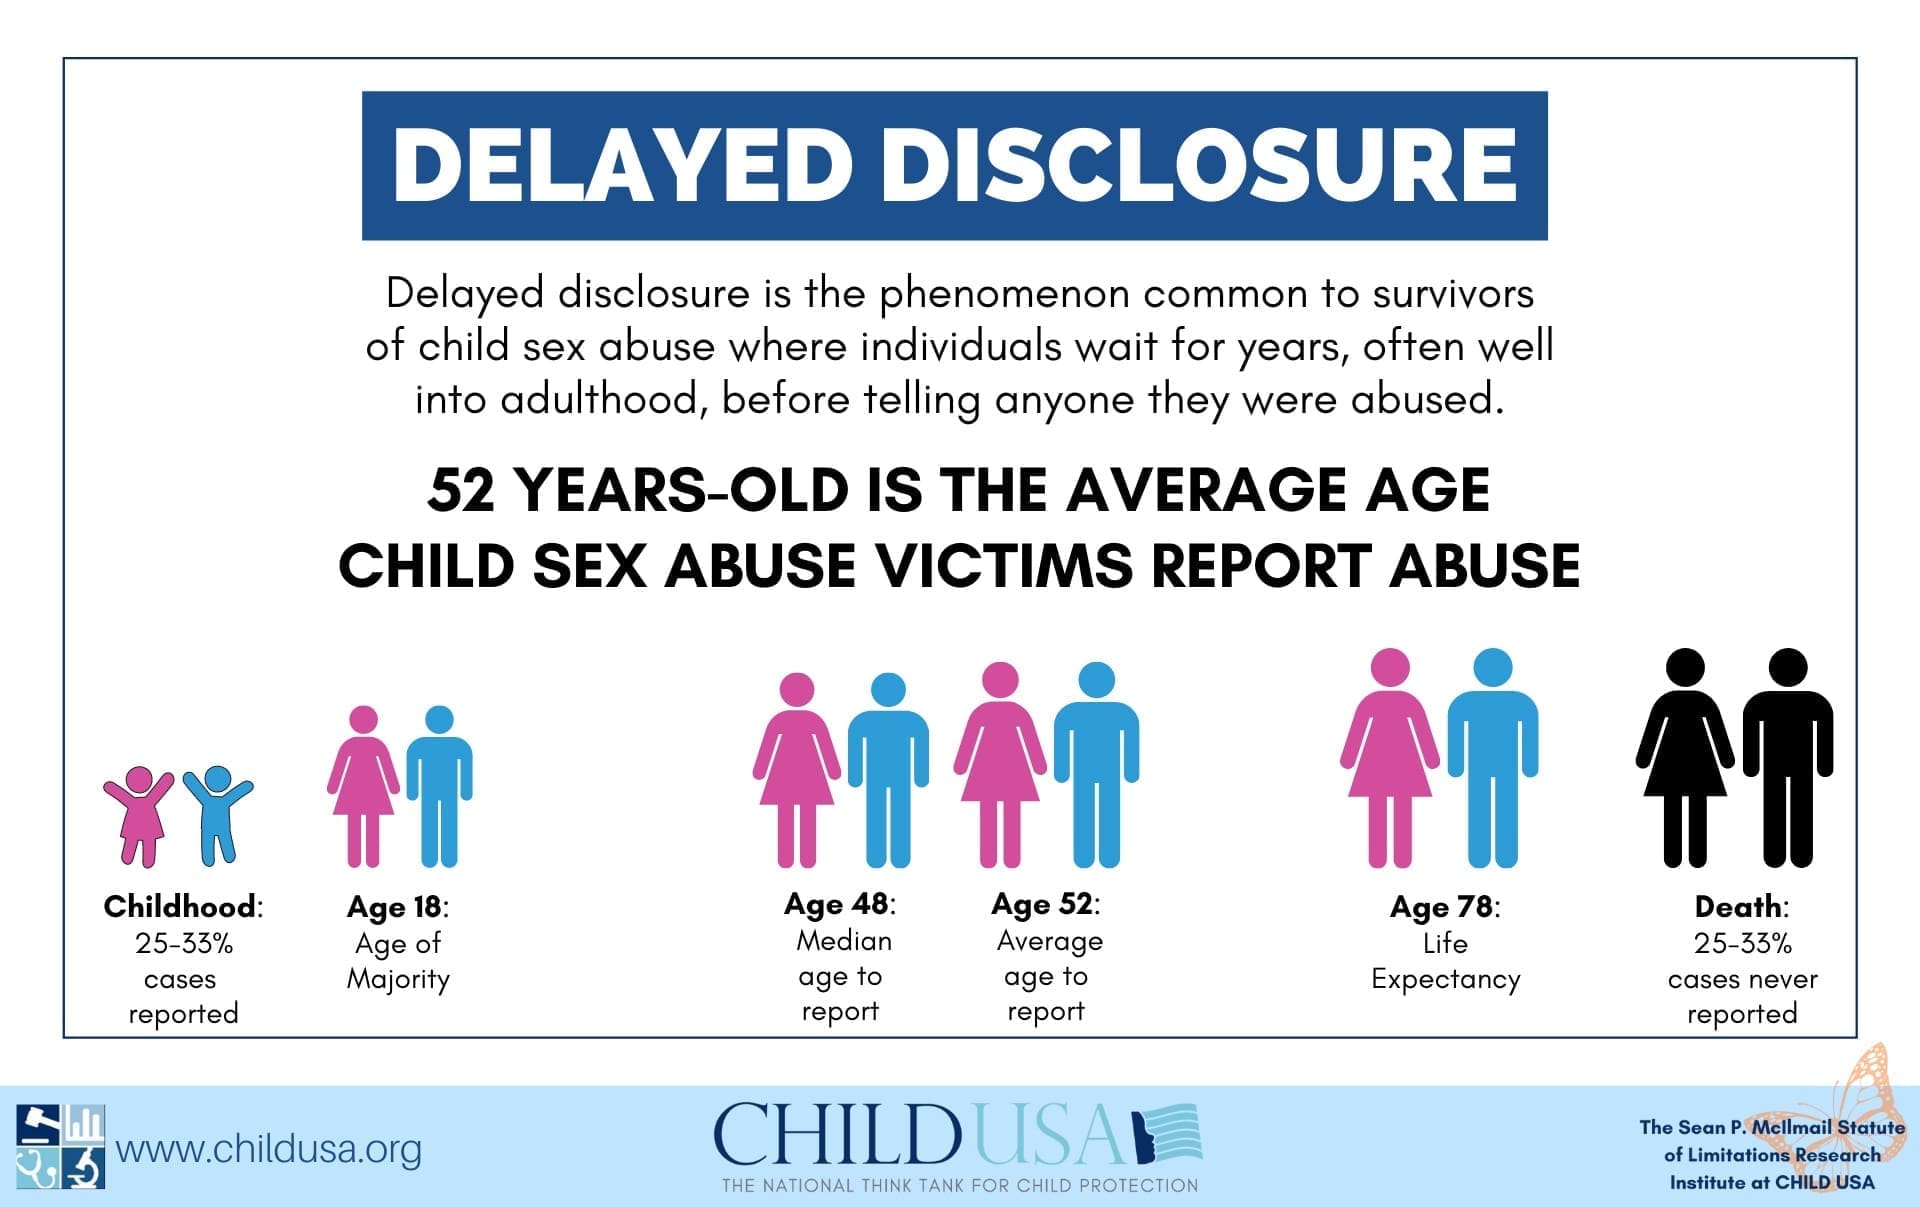 Why Your Law Firm Should Get Actively Involved in Sexual Abuse Cases